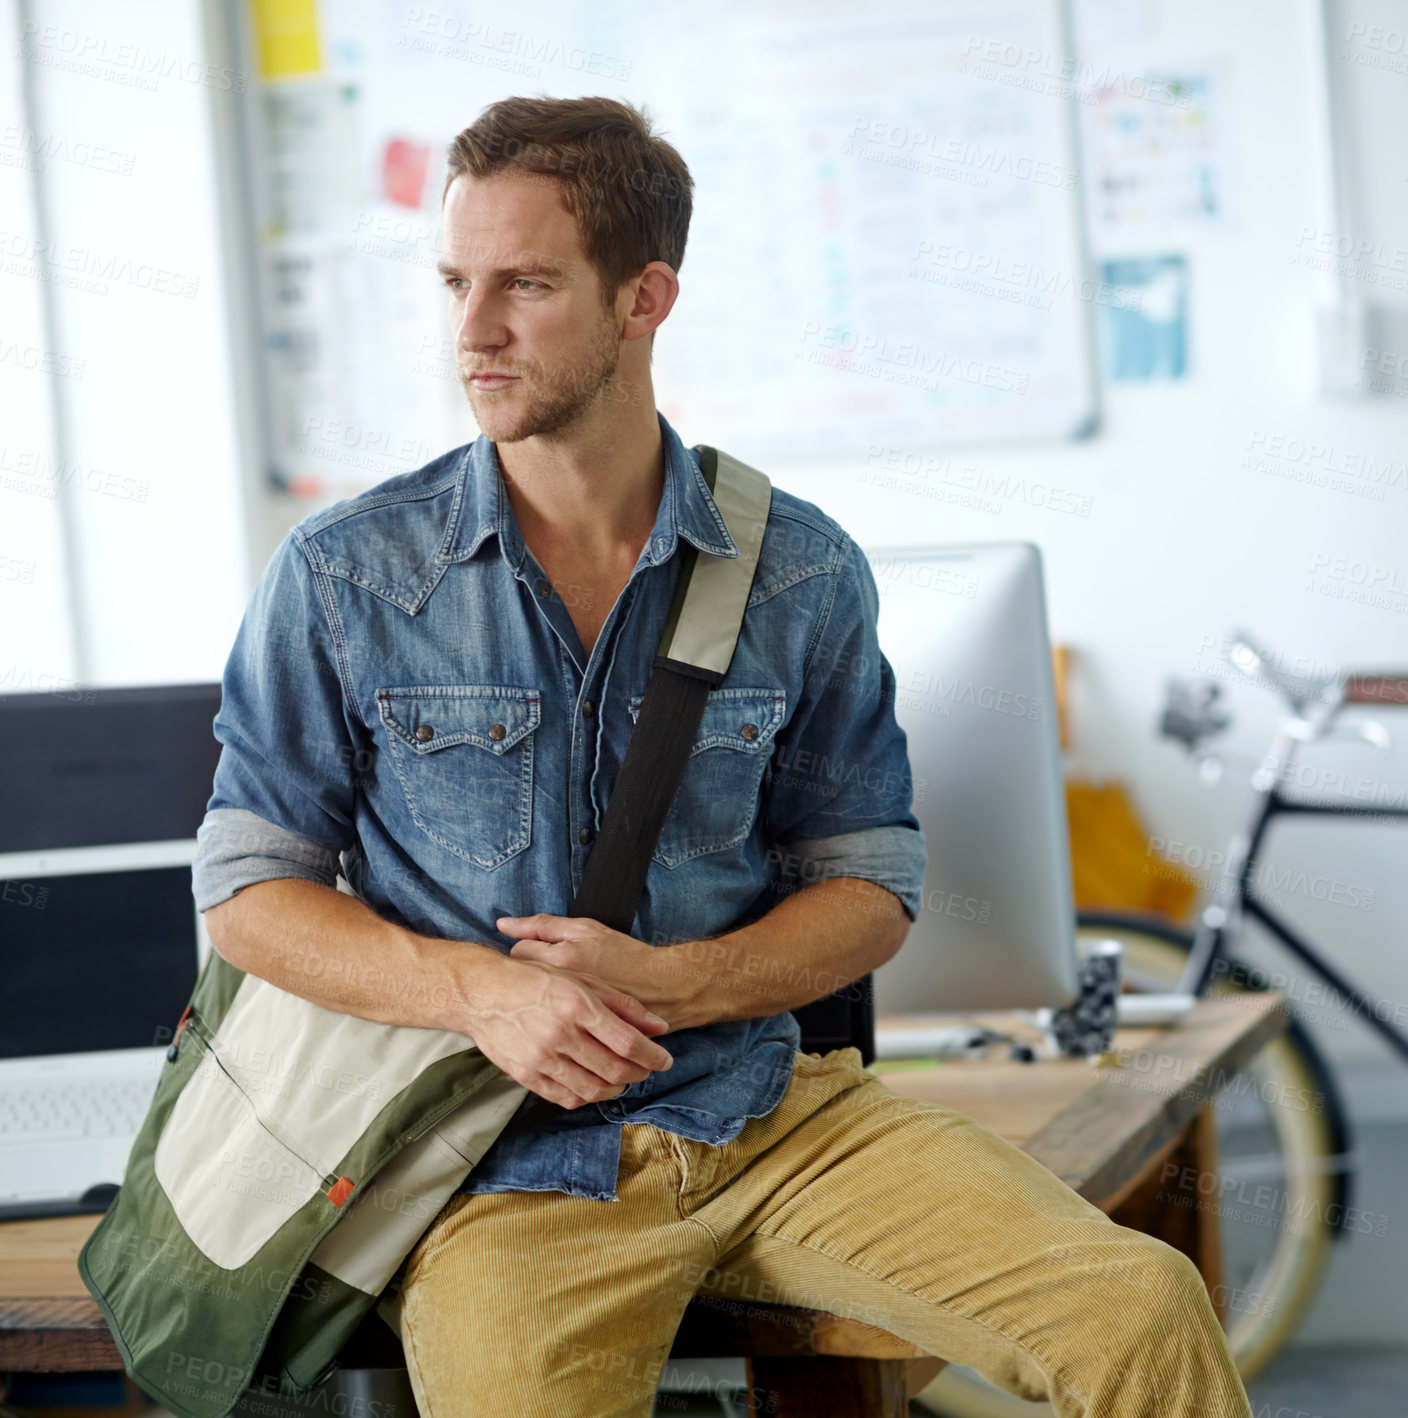 Buy stock photo A young man with a satchel bag sitting on his desk while looking out the window